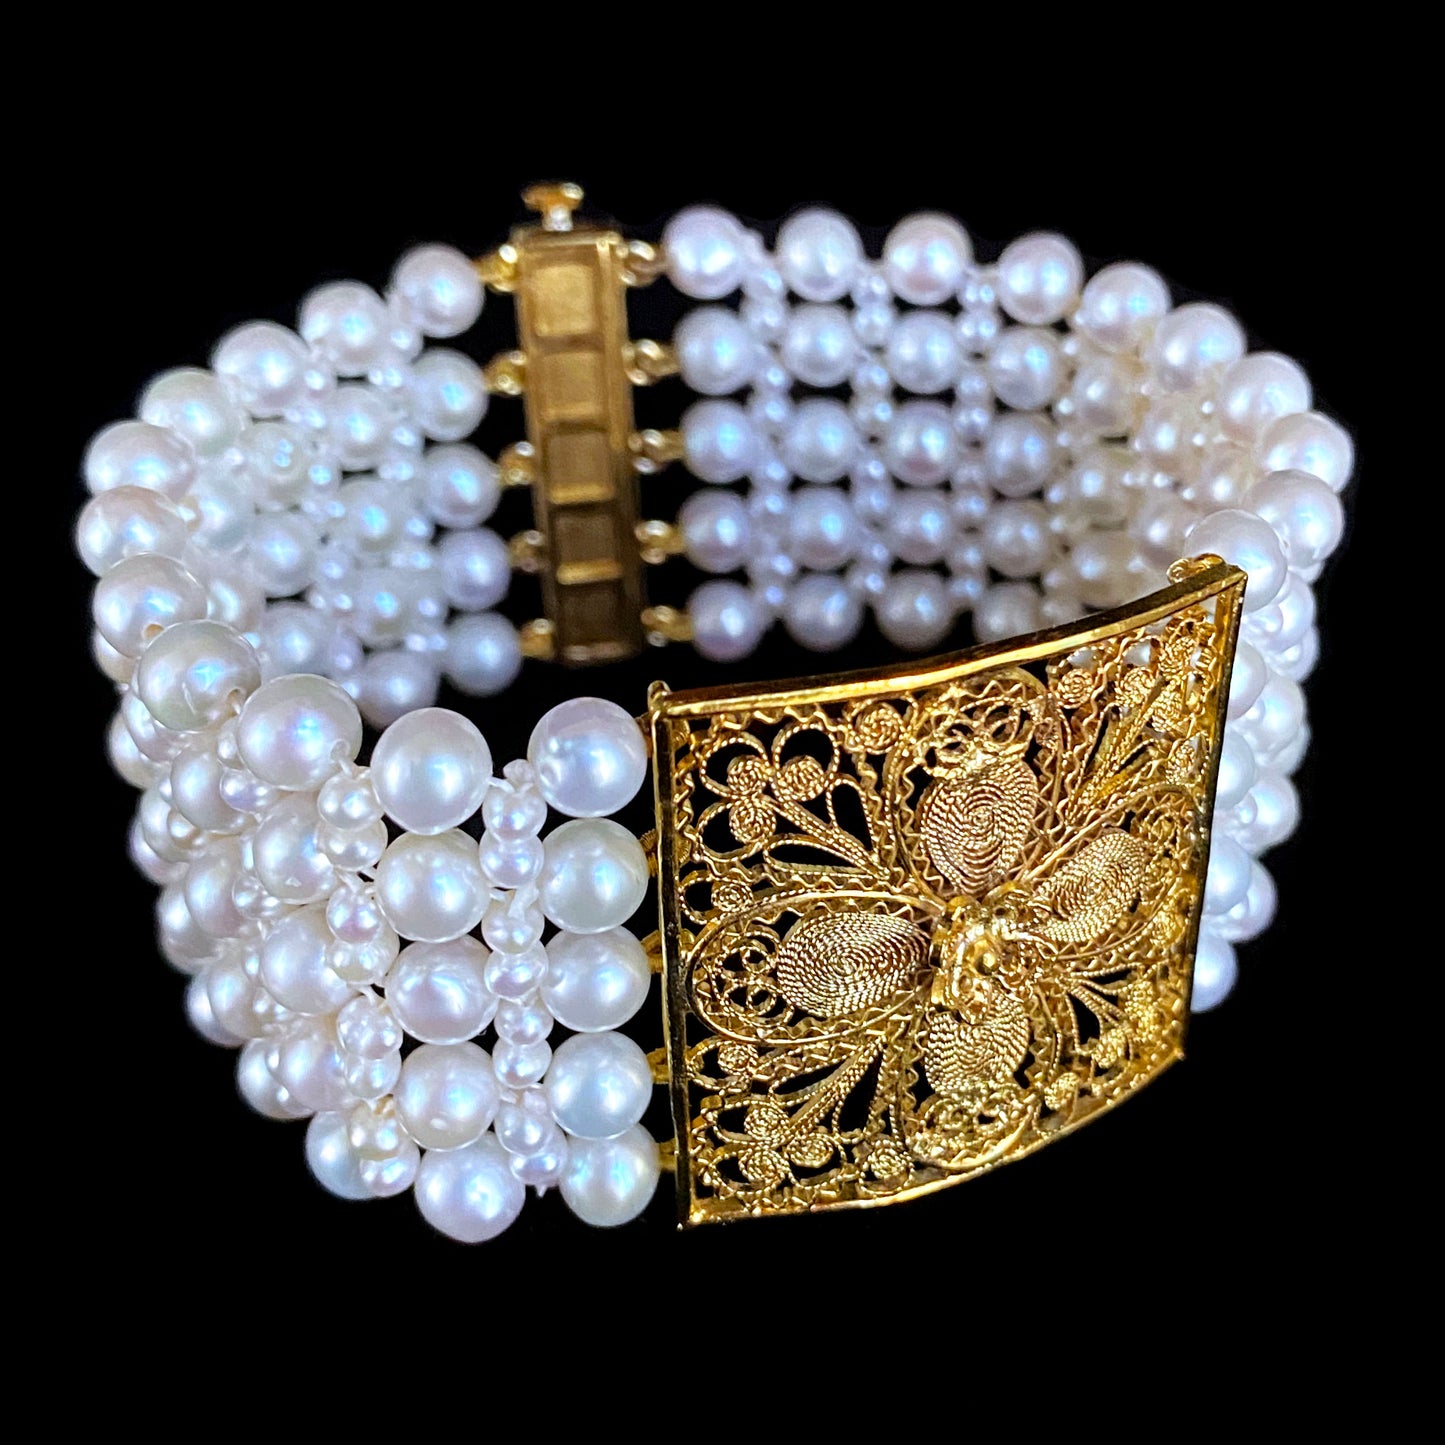 Pearl Woven Bracelet with 18k Yellow Gold Floral Centerpiece